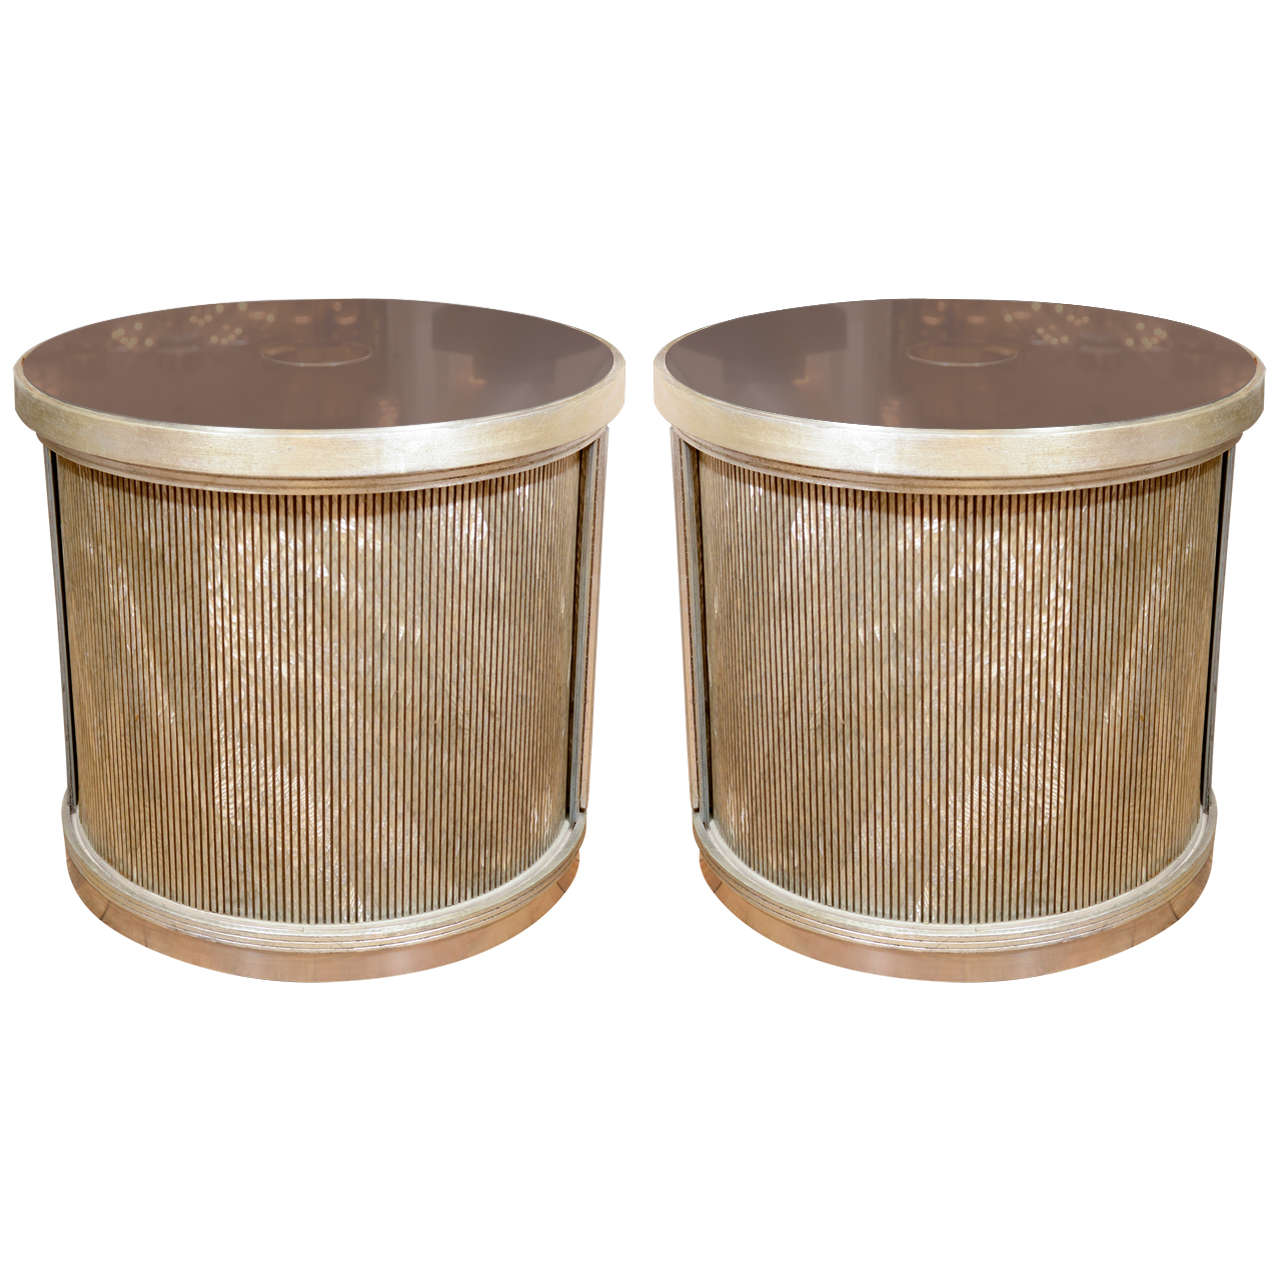 Pair Of Drum Form Side Tables With Sliding Door And Faux Finish Details